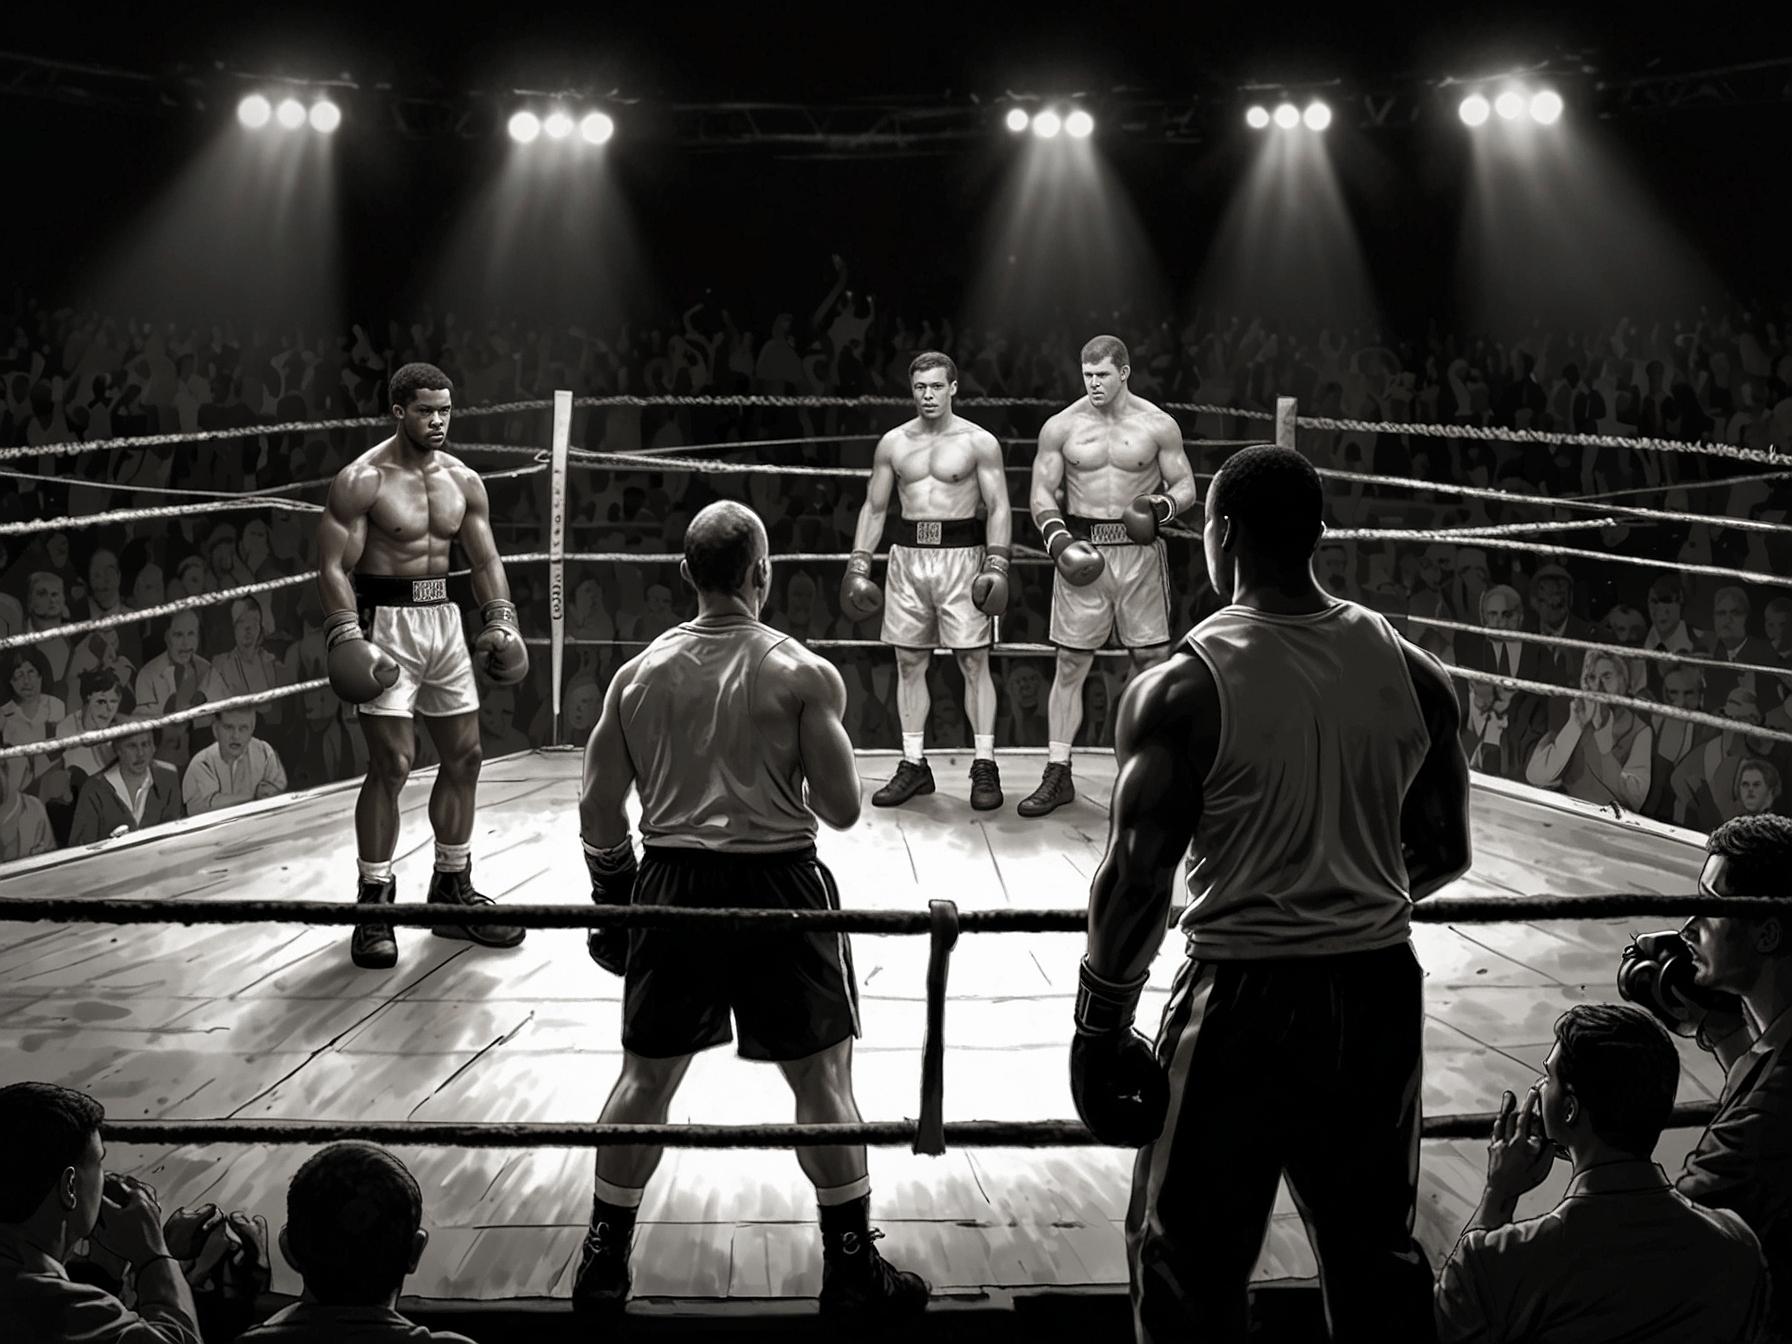 A boxing ring with judges and athletes, symbolizing the strict anti-doping regulations in sports and the complexities of enforcing penalties posthumously.